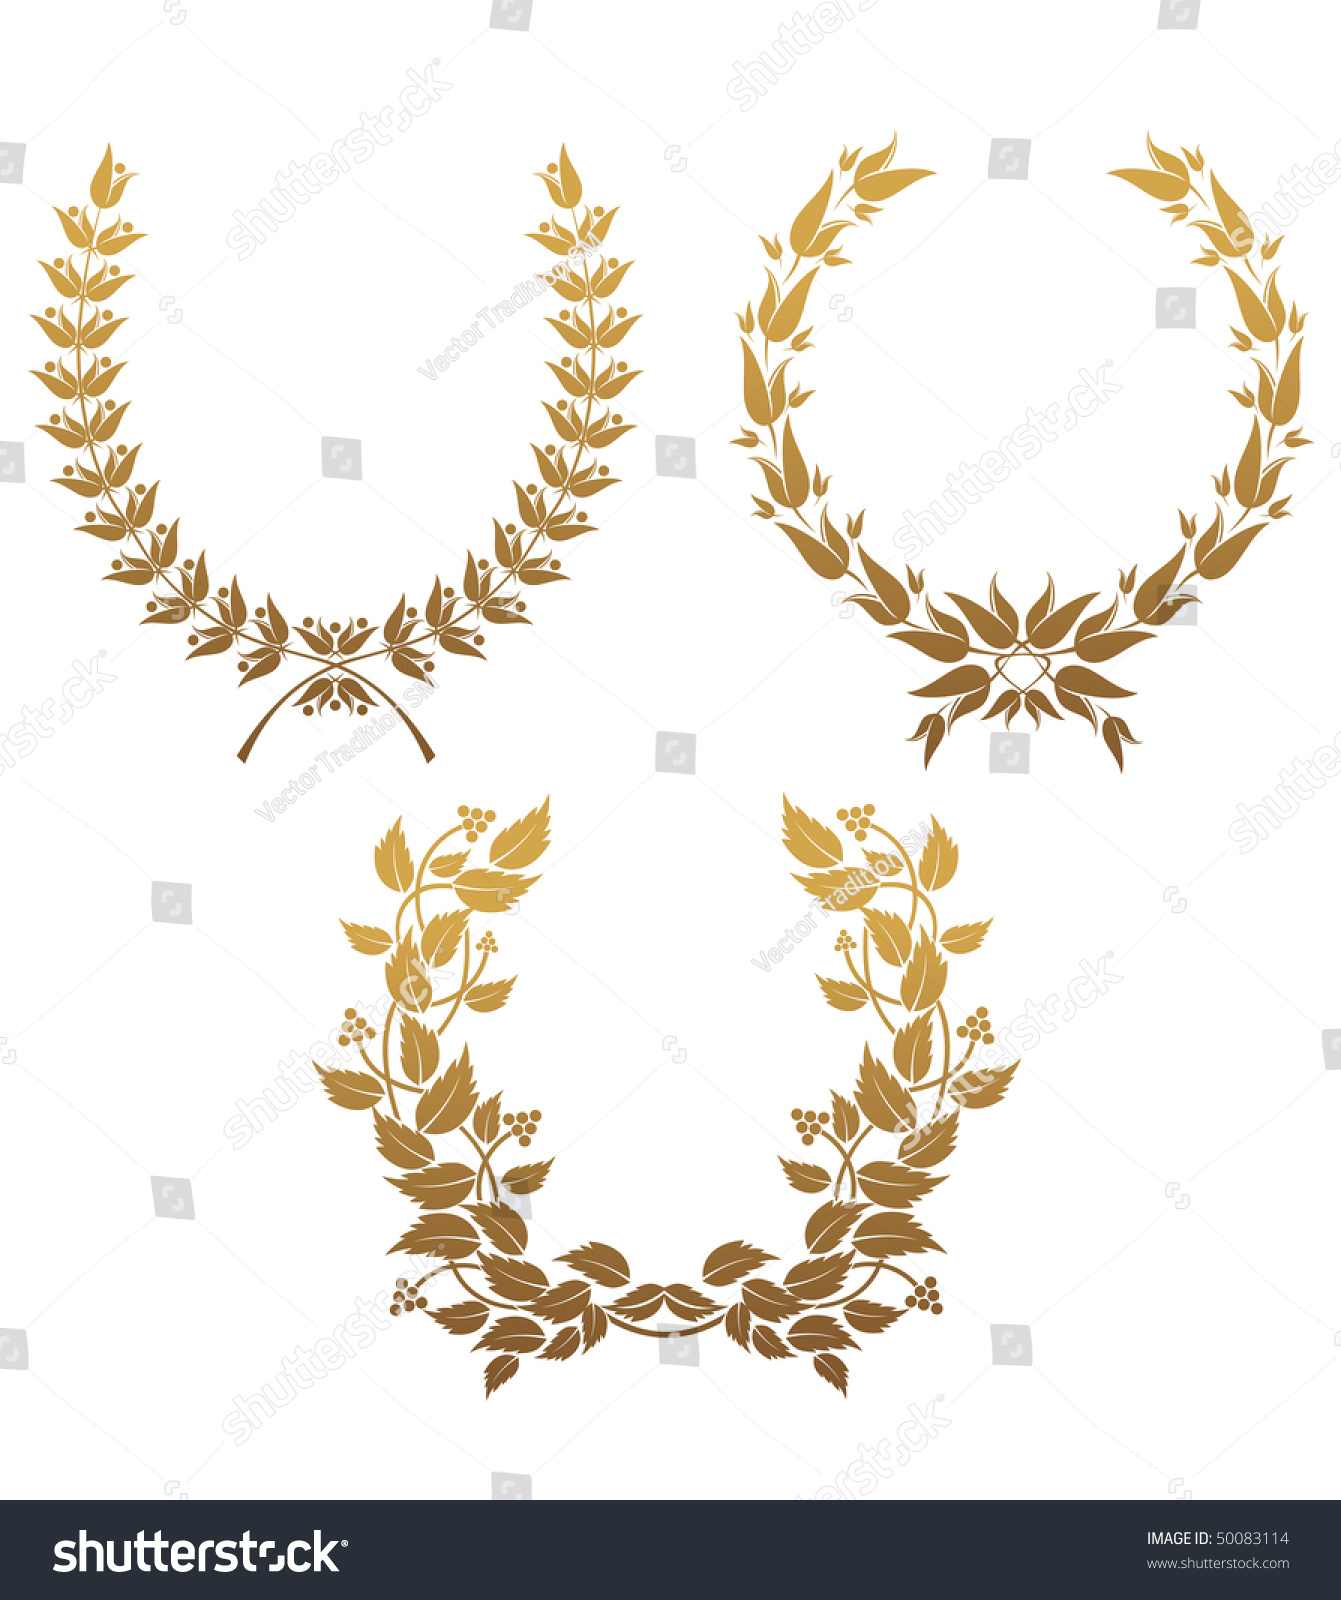 Set Of Gold Laurel Wreaths For Design Vector Version Is Also Available